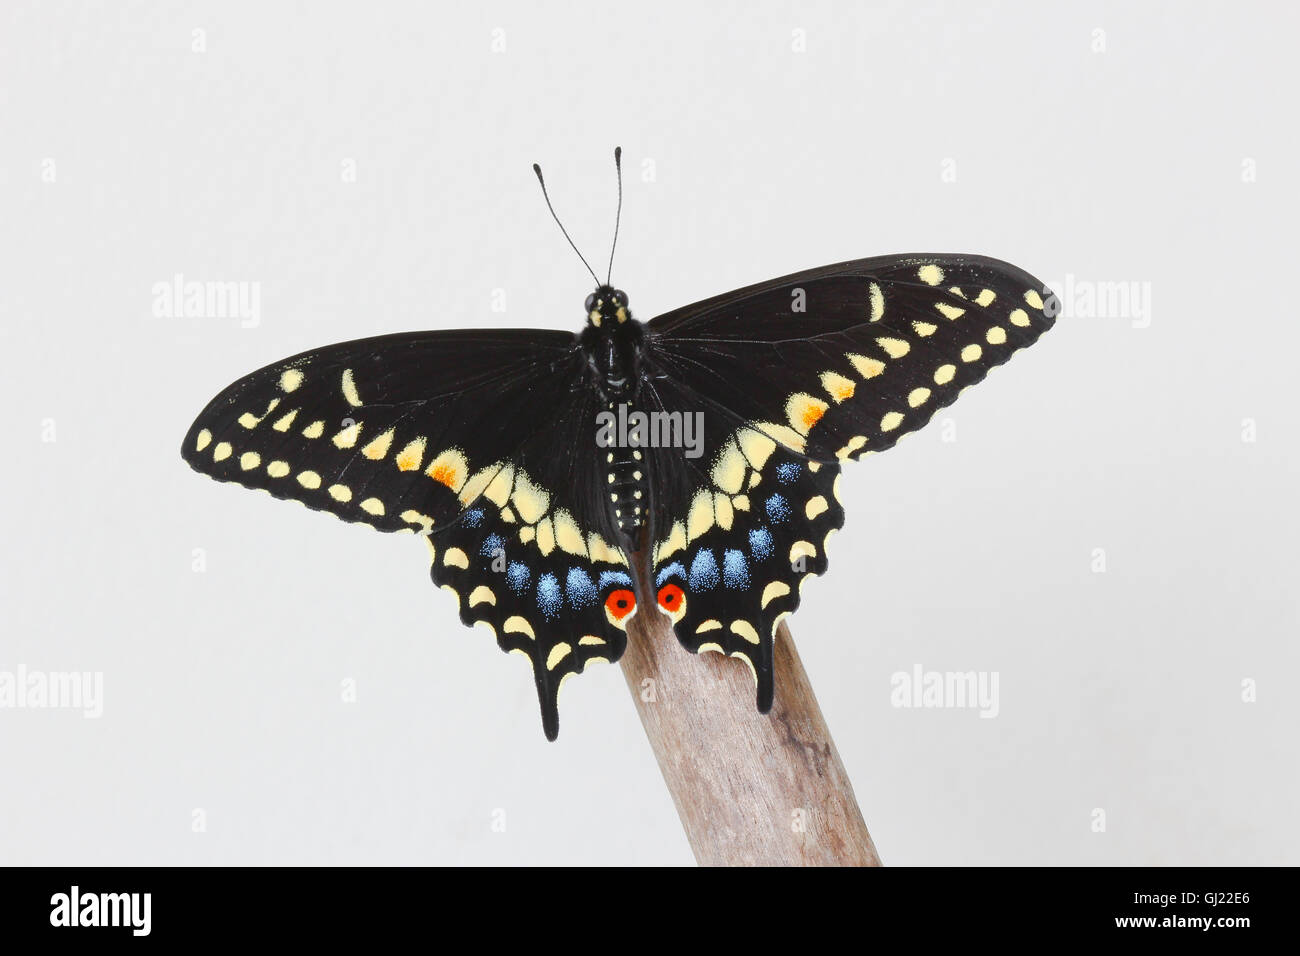 A freshly emerged male Black Swallowtail butterfly (Papilio polyxenes) resting on a piece of driftwood, Indiana, United States Stock Photo